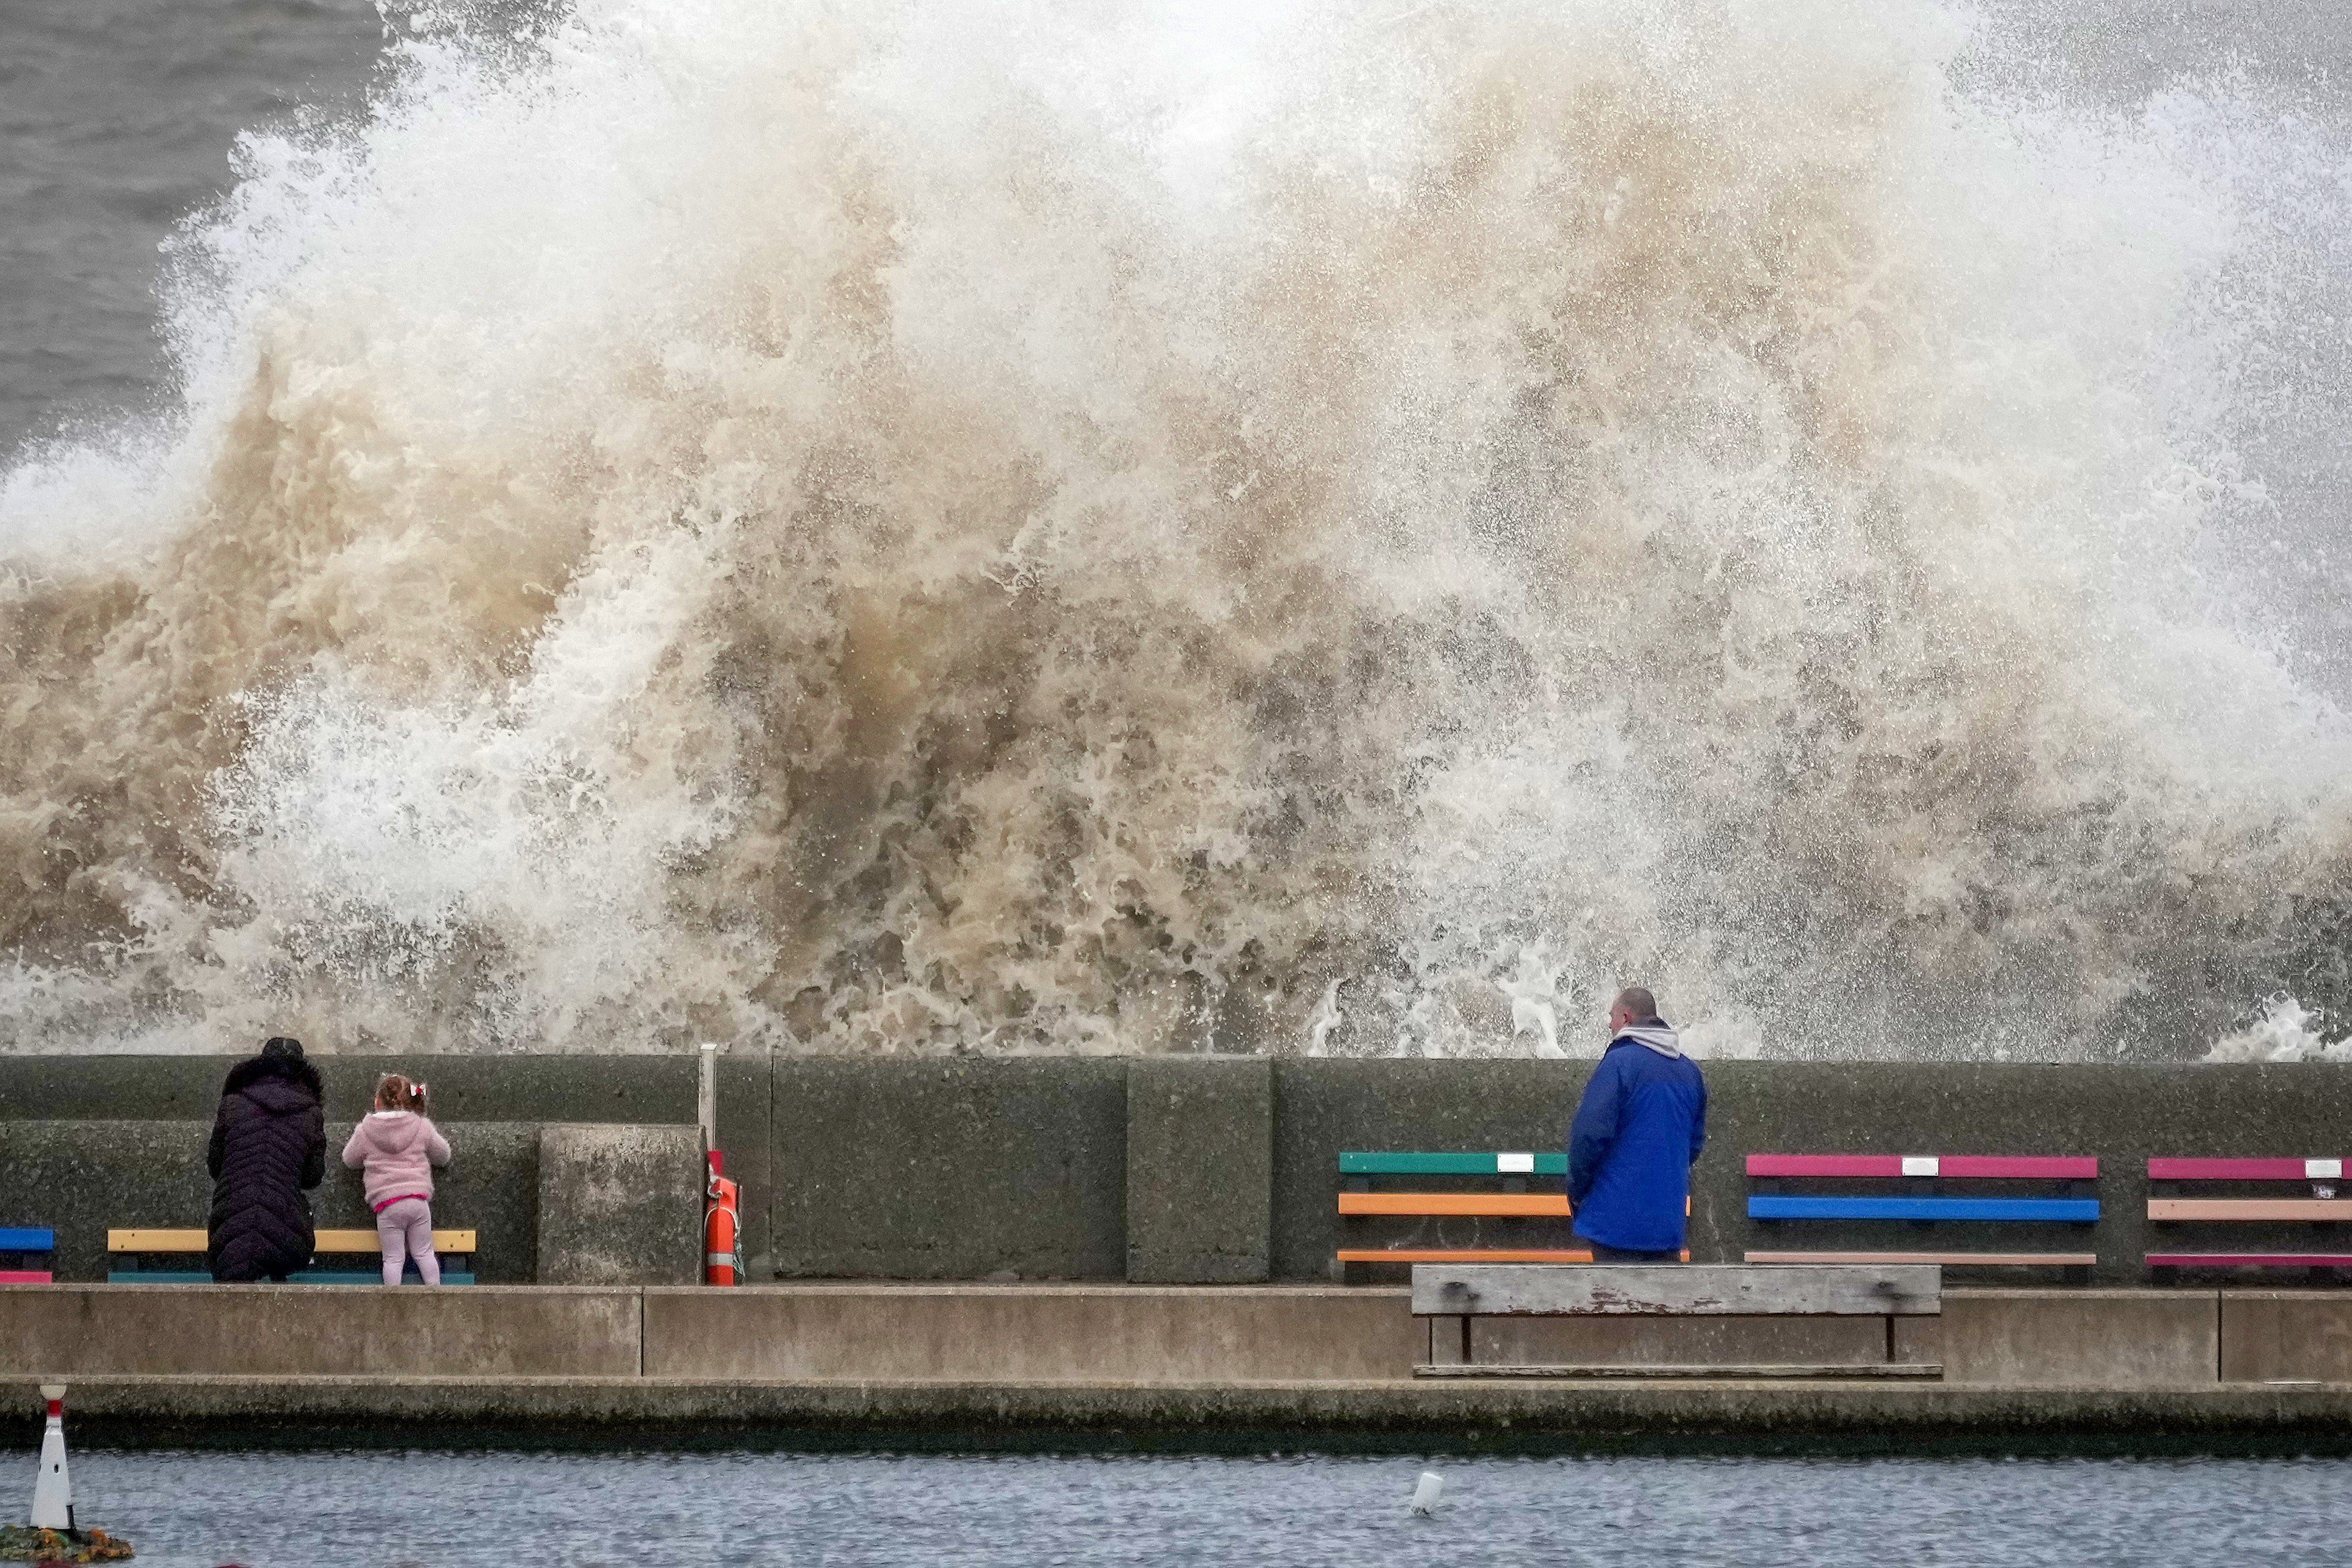 People view the waves created by high winds and spring tides hitting the sea wall at New Brighton promenade on 17 February 2022 in Liverpool